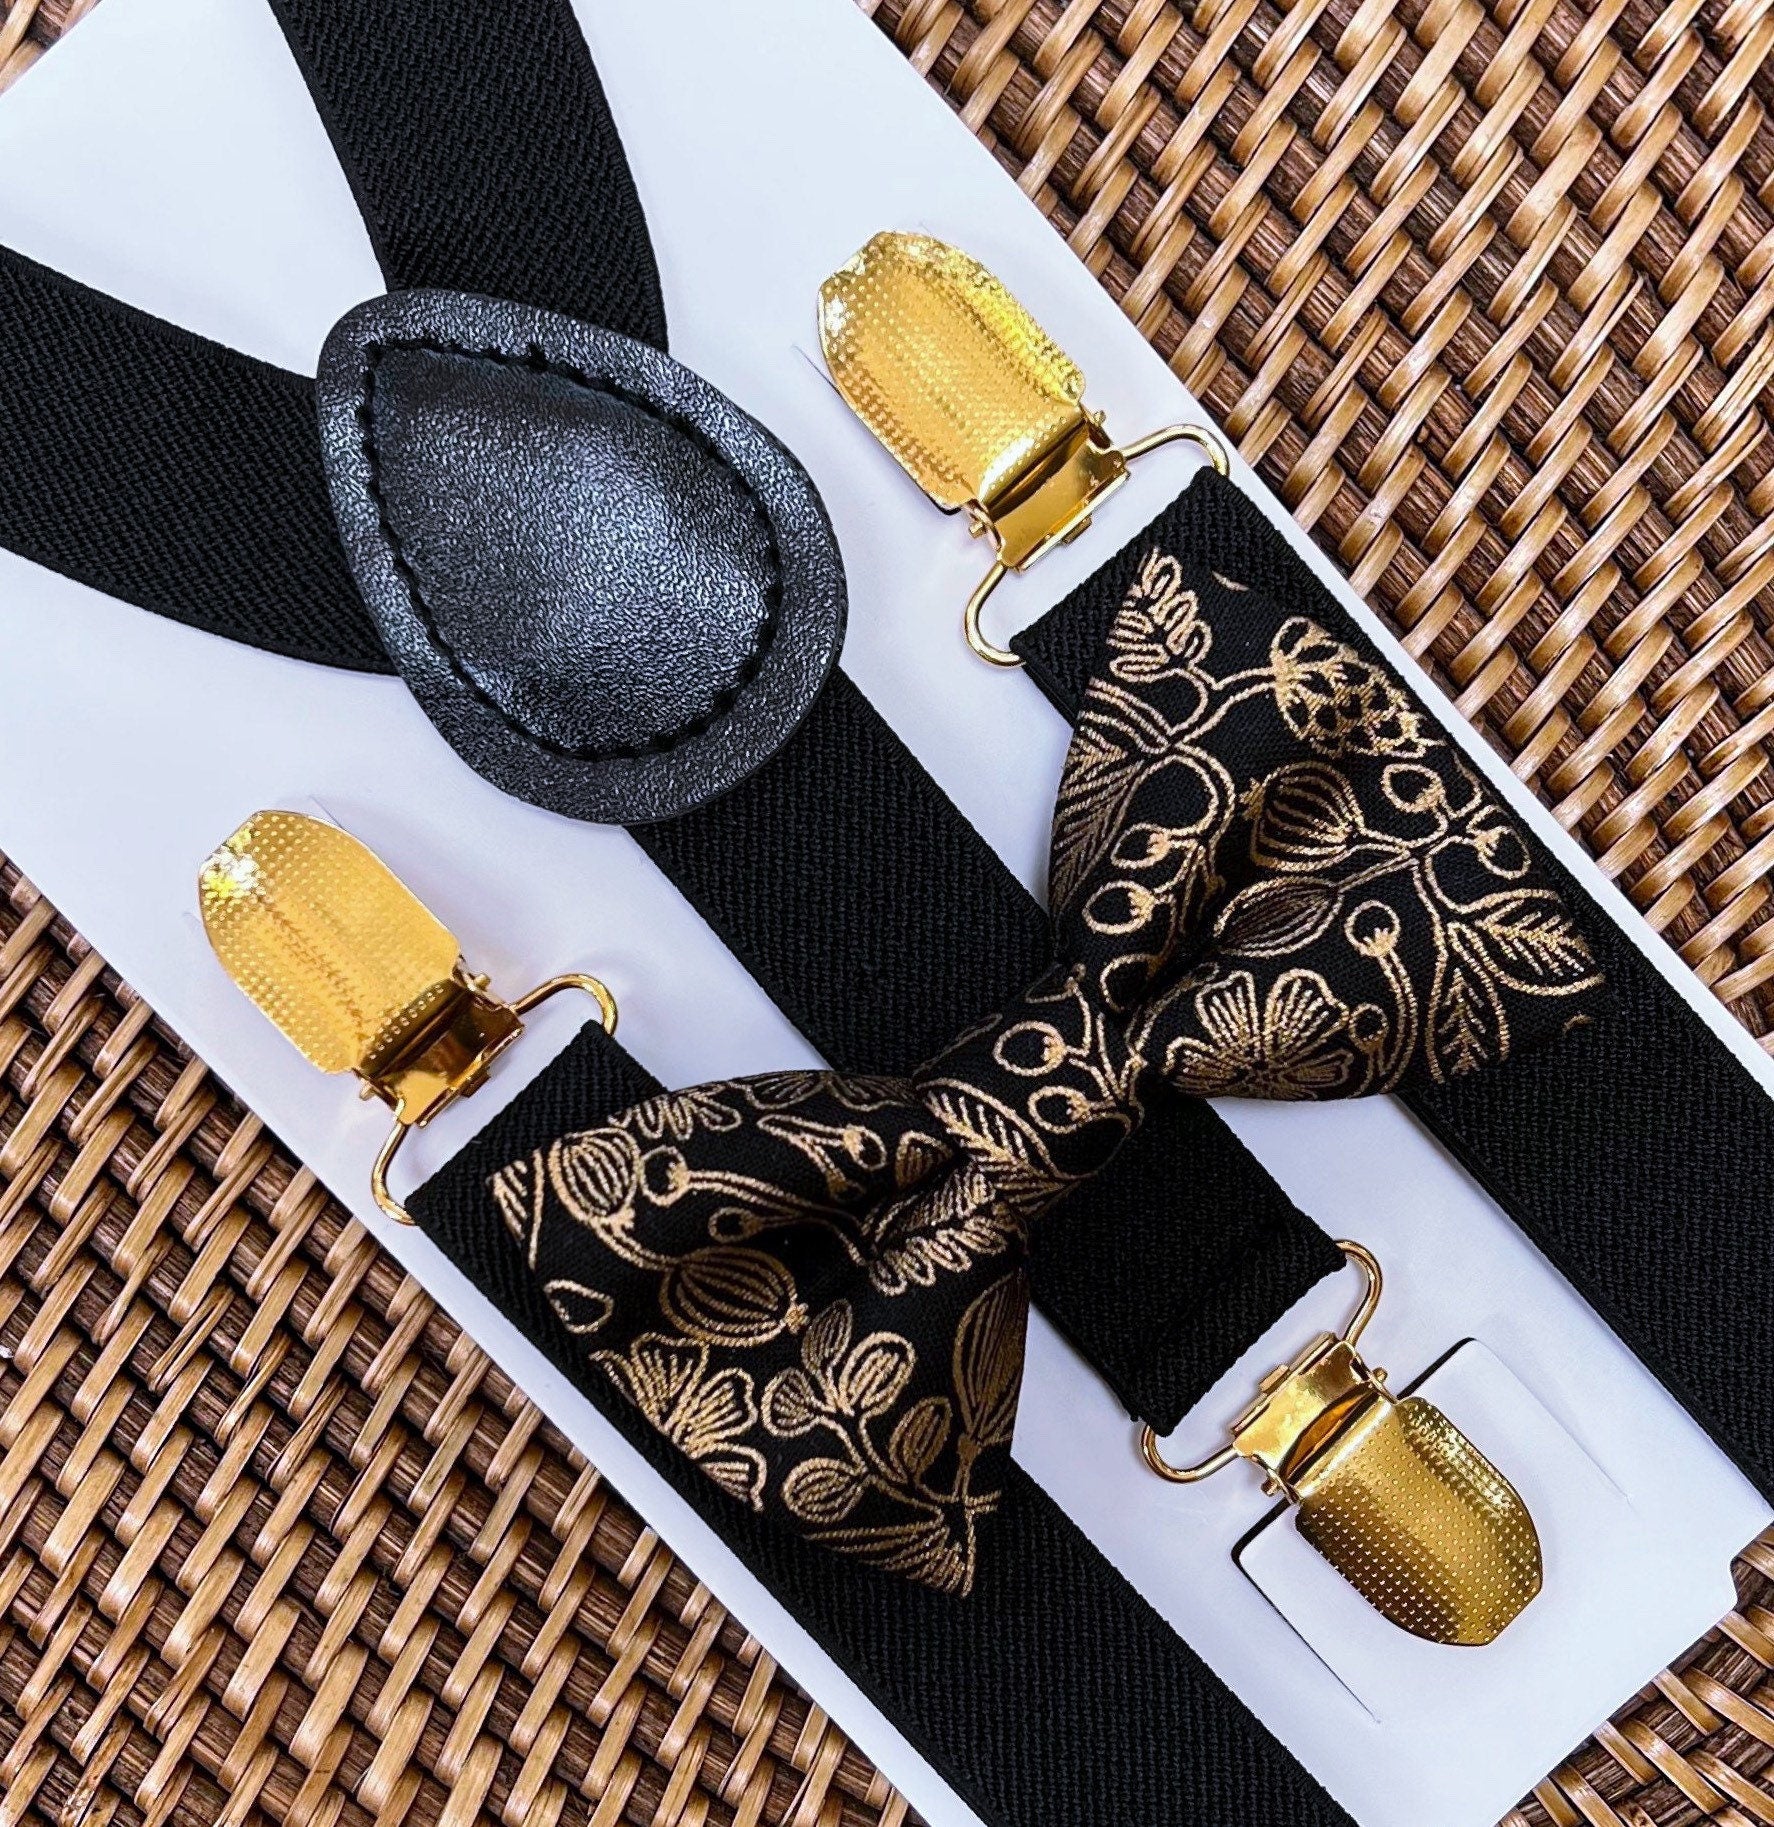 Black & Gold Floral Bow Tie and Black & Gold Suspenders Set